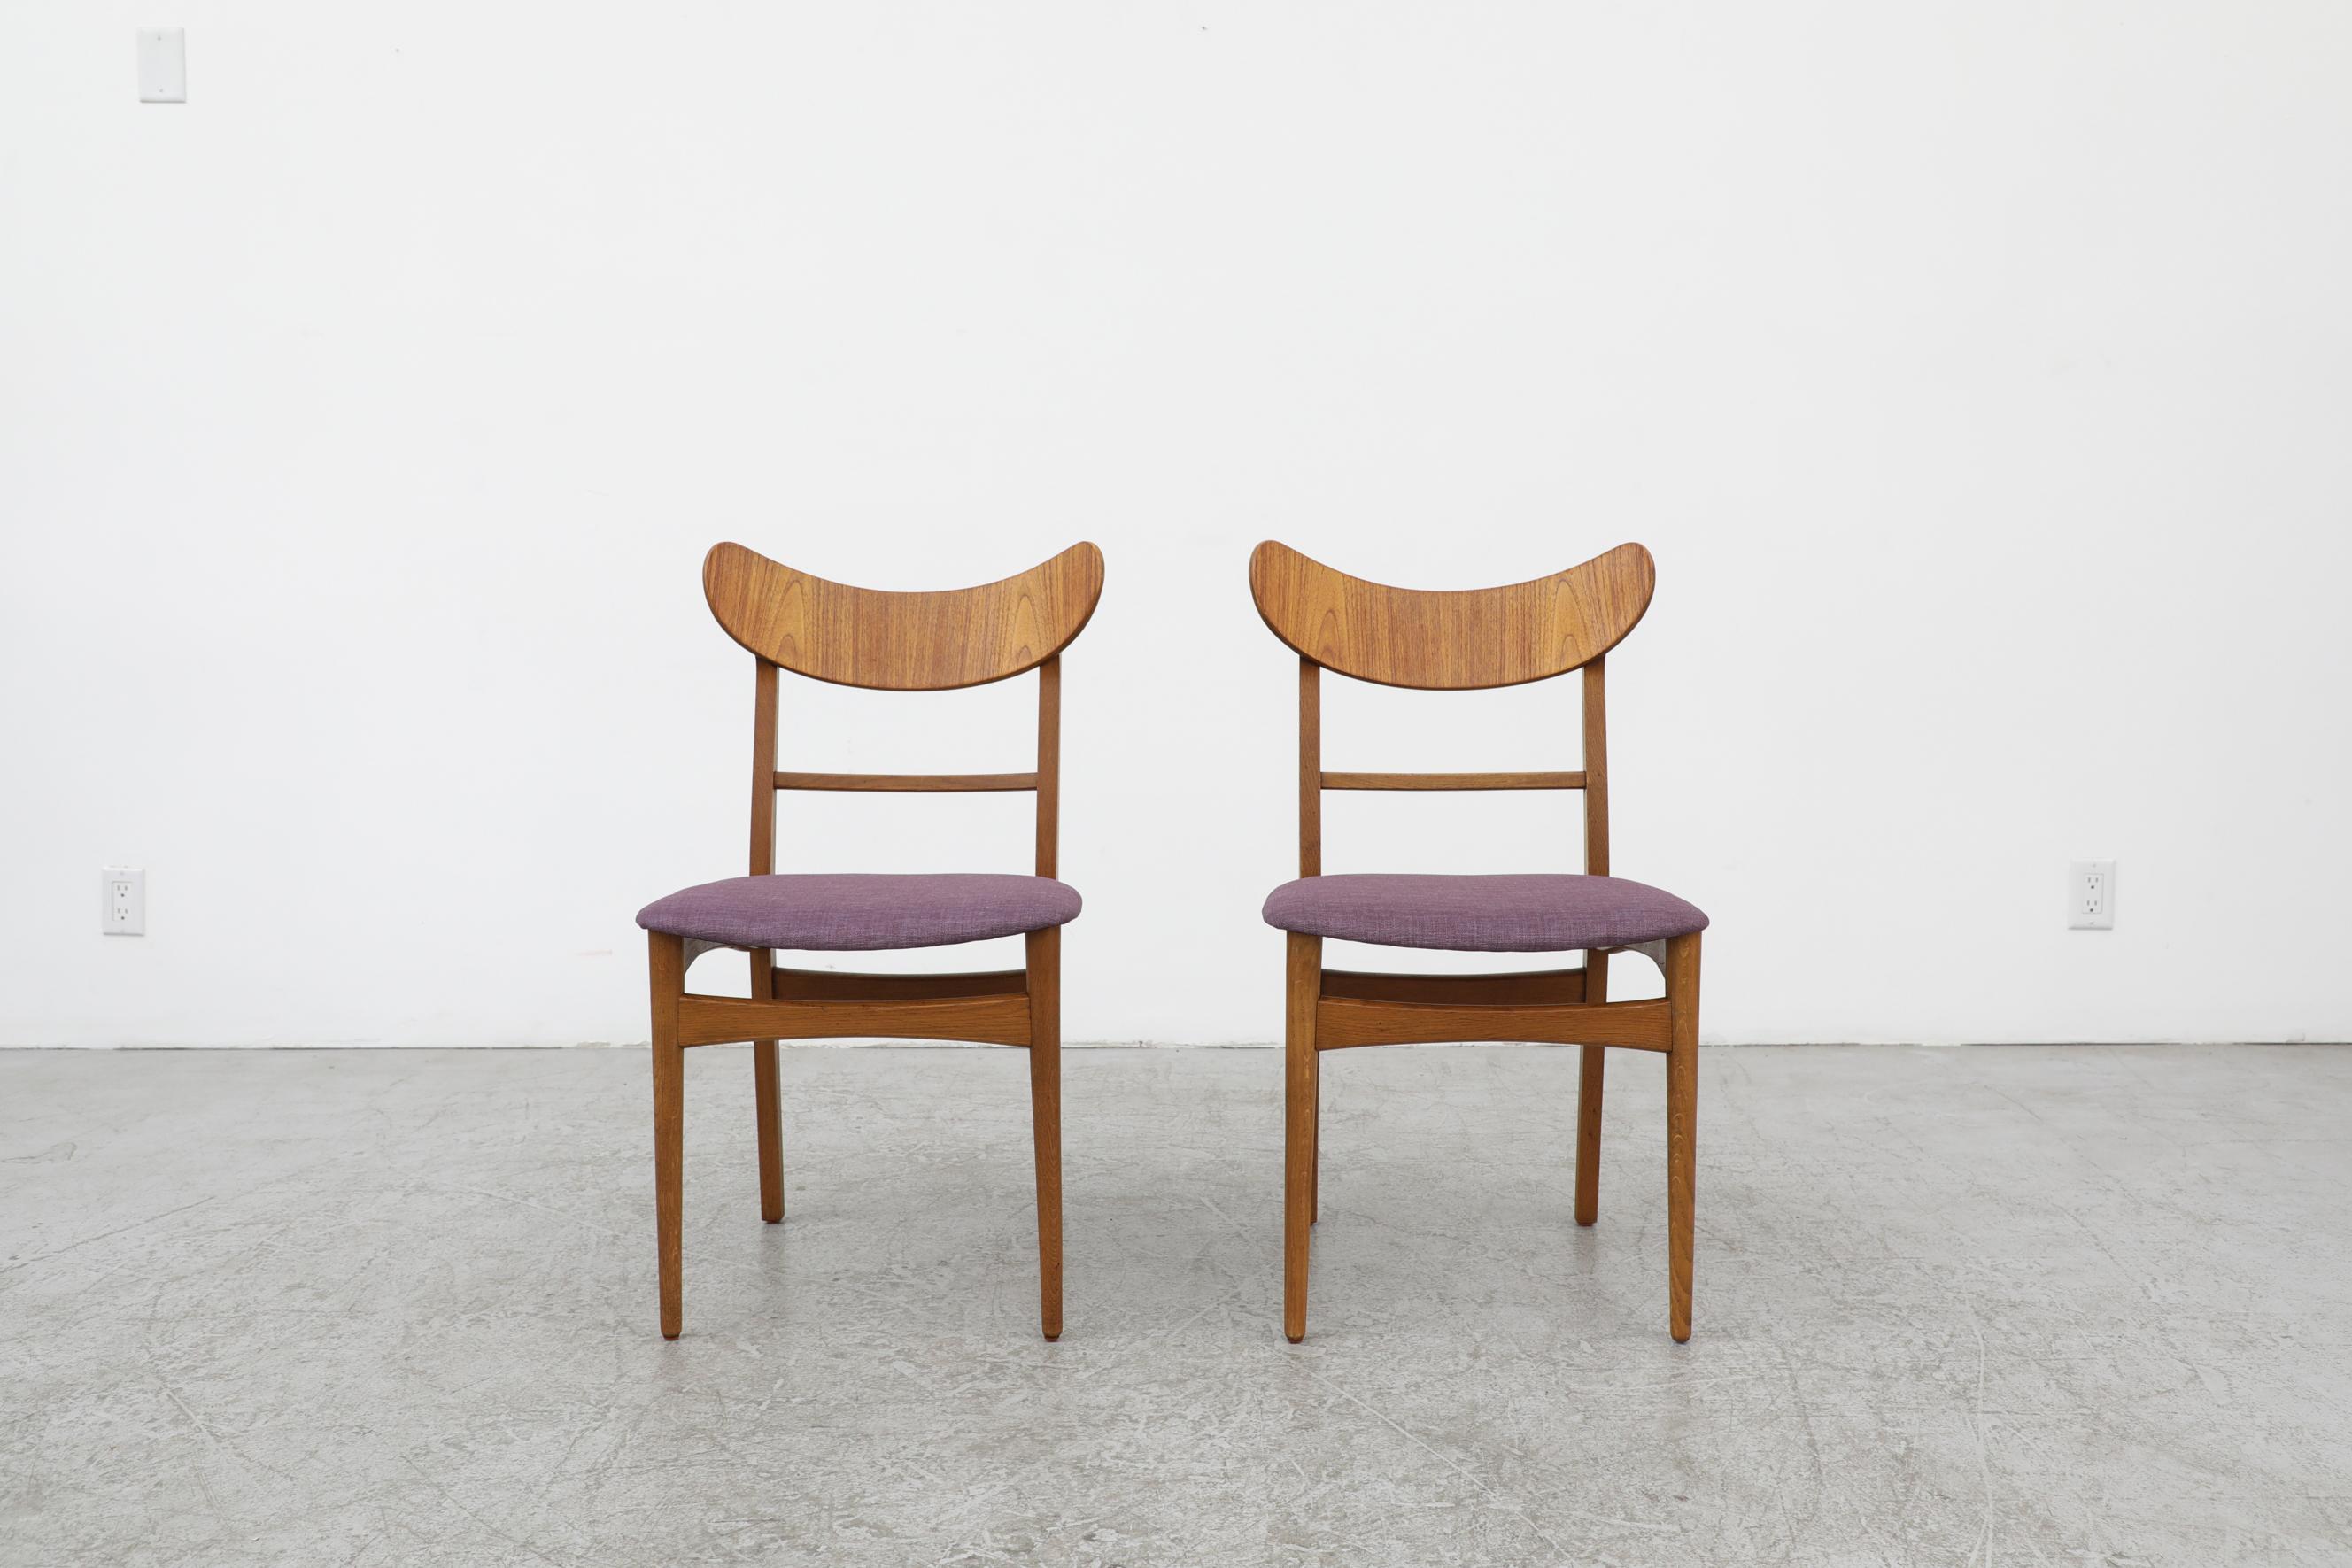 Pair of Wegner style dining chairs with curved teak almond shaped backrests and newer upholstered seats in purple. In original condition with some wear to the frame including a small crack on the left side of one of the side rails of one chair. The